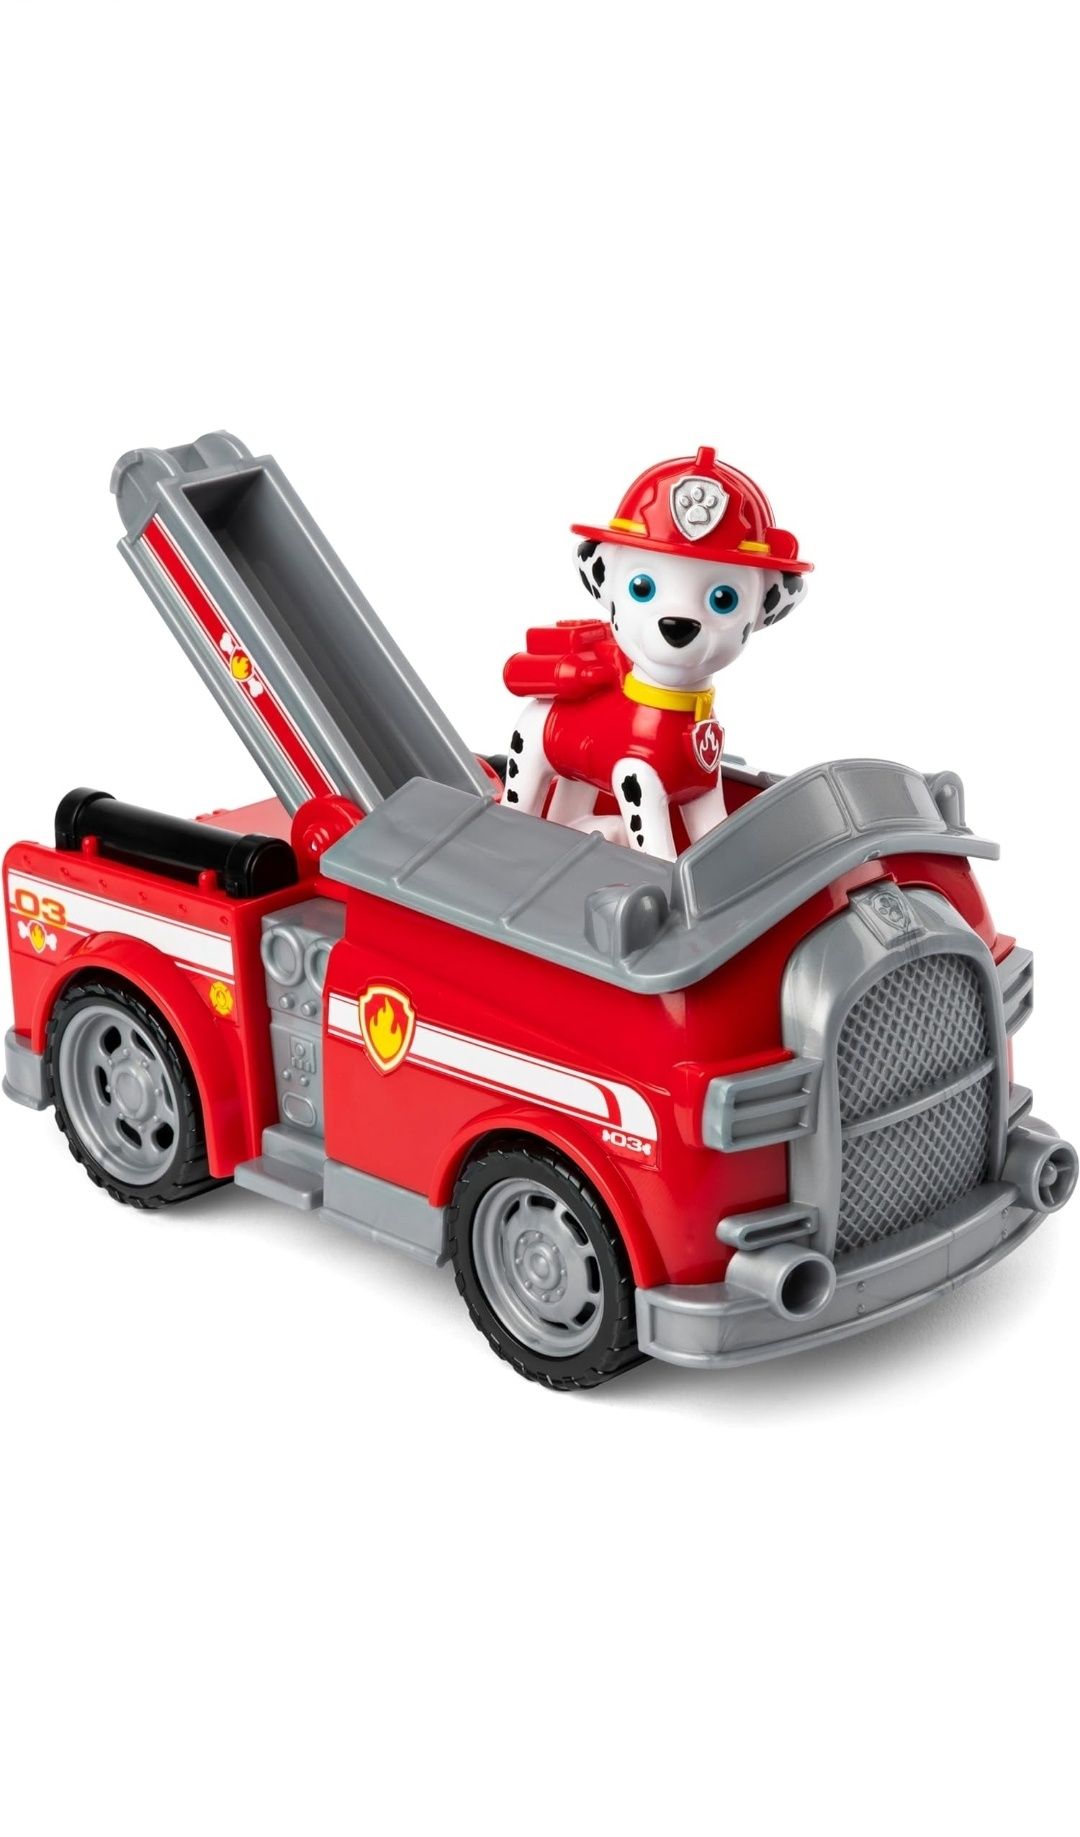 Paw Patrol Skye Helicopter, Marshall Fire Engine